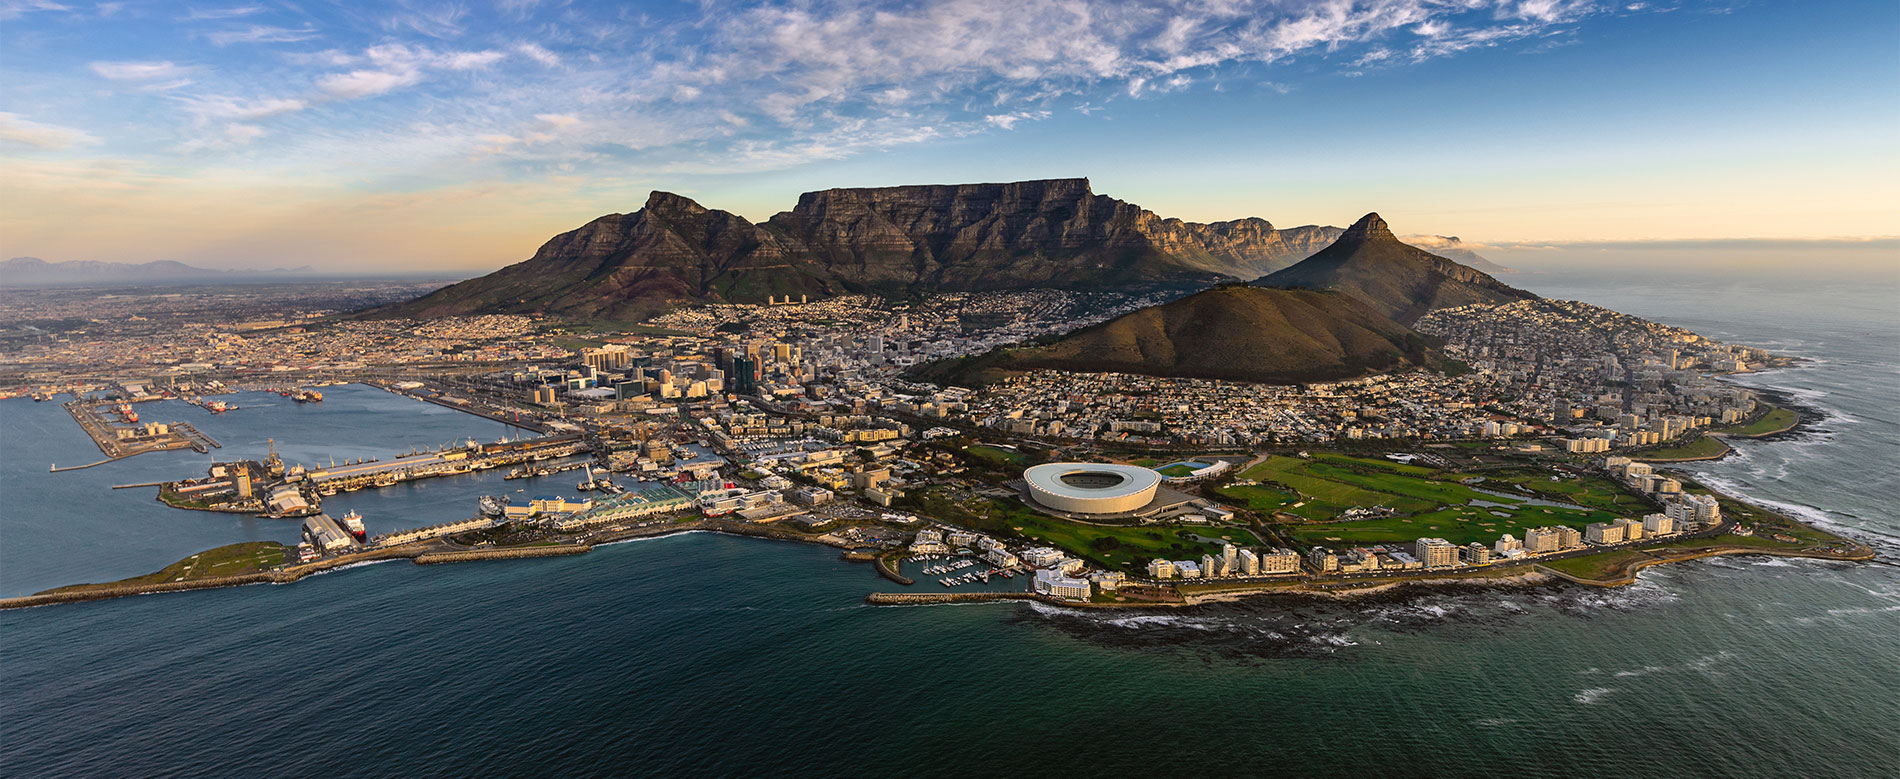 an image of table mountain surrounded by the ocean